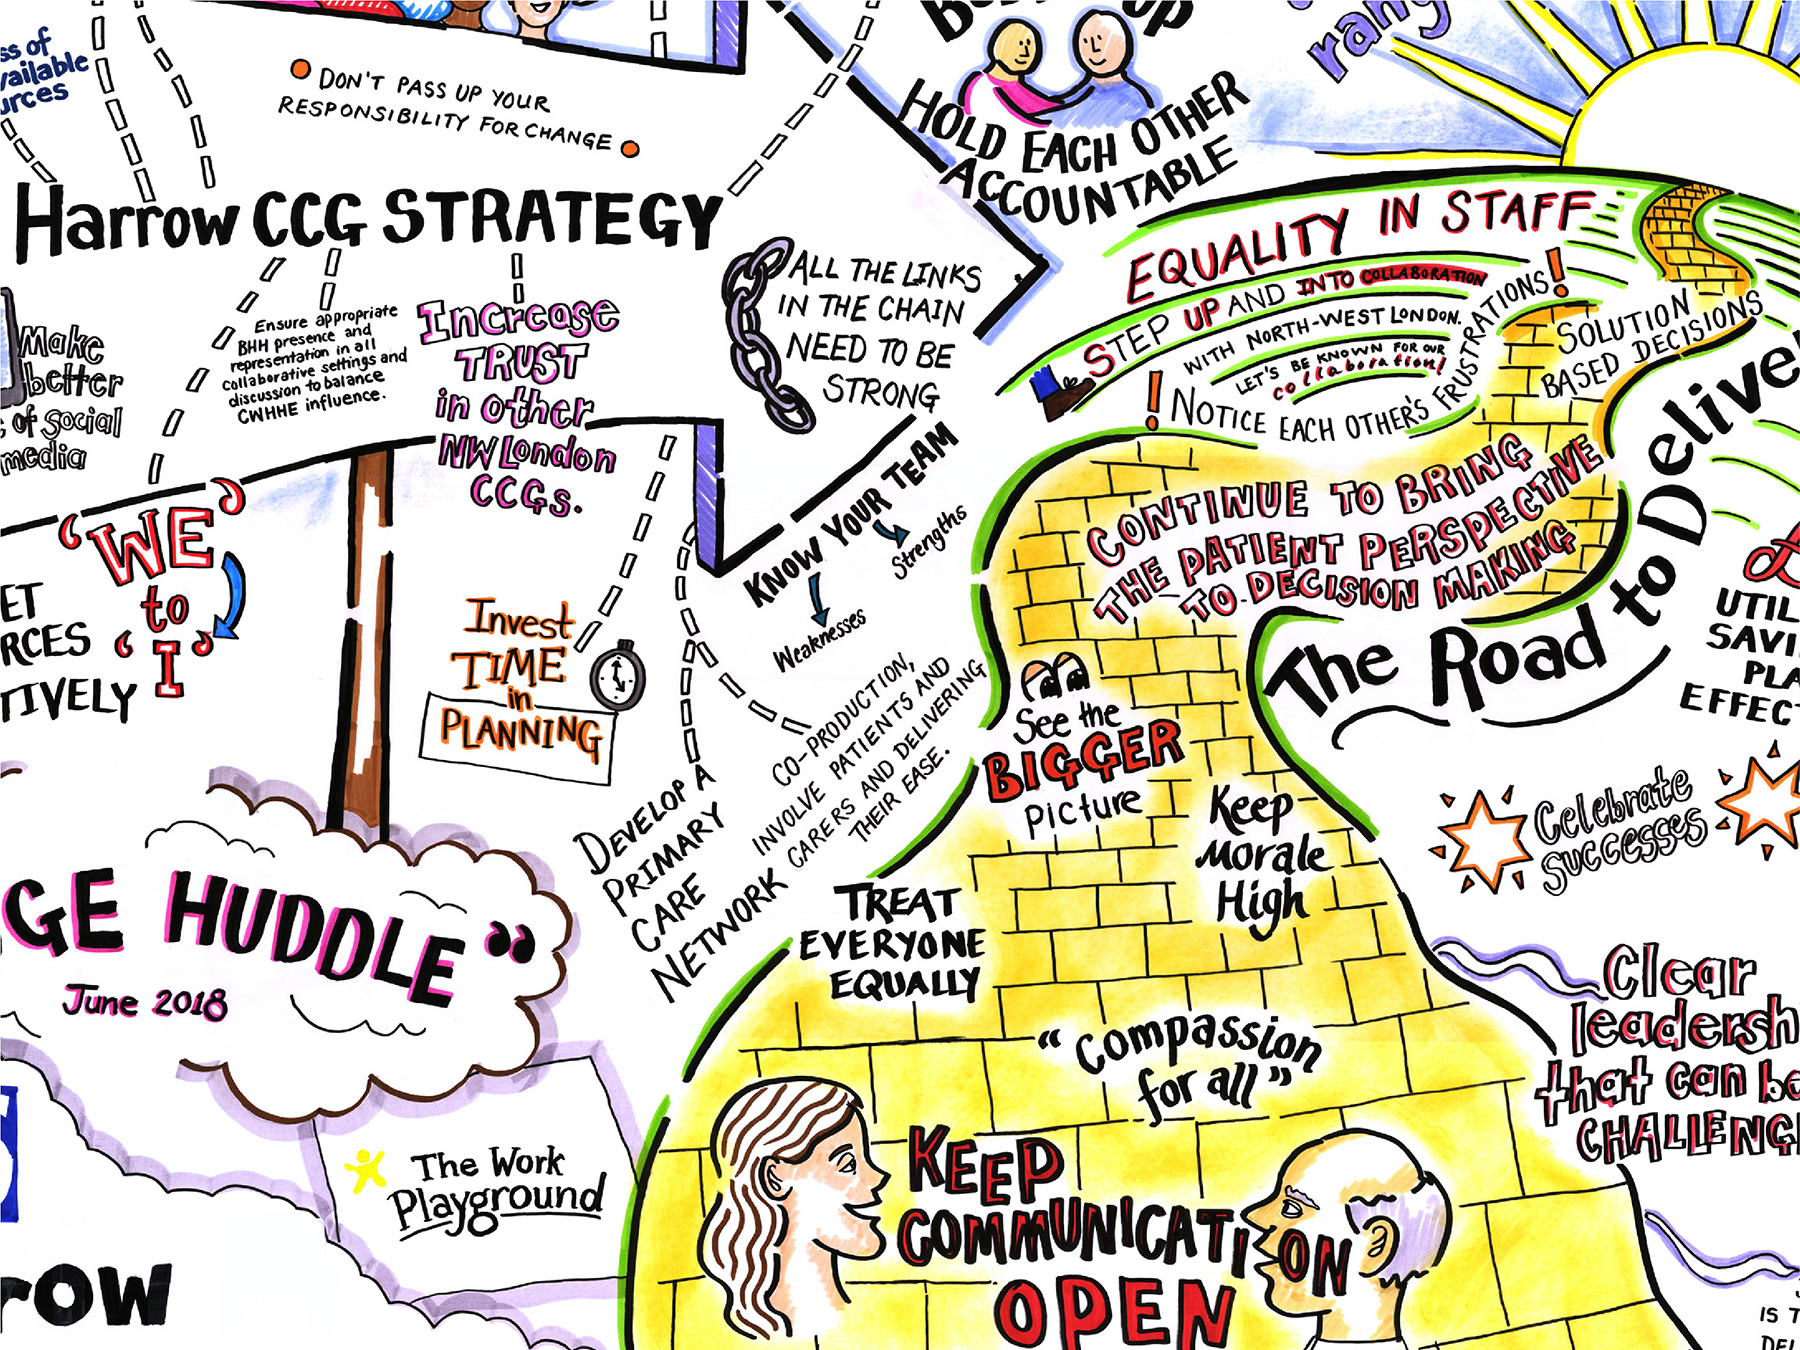 Example images of live graphic recording, graphic facilitation in client meetings or conferences by Inky Thinking